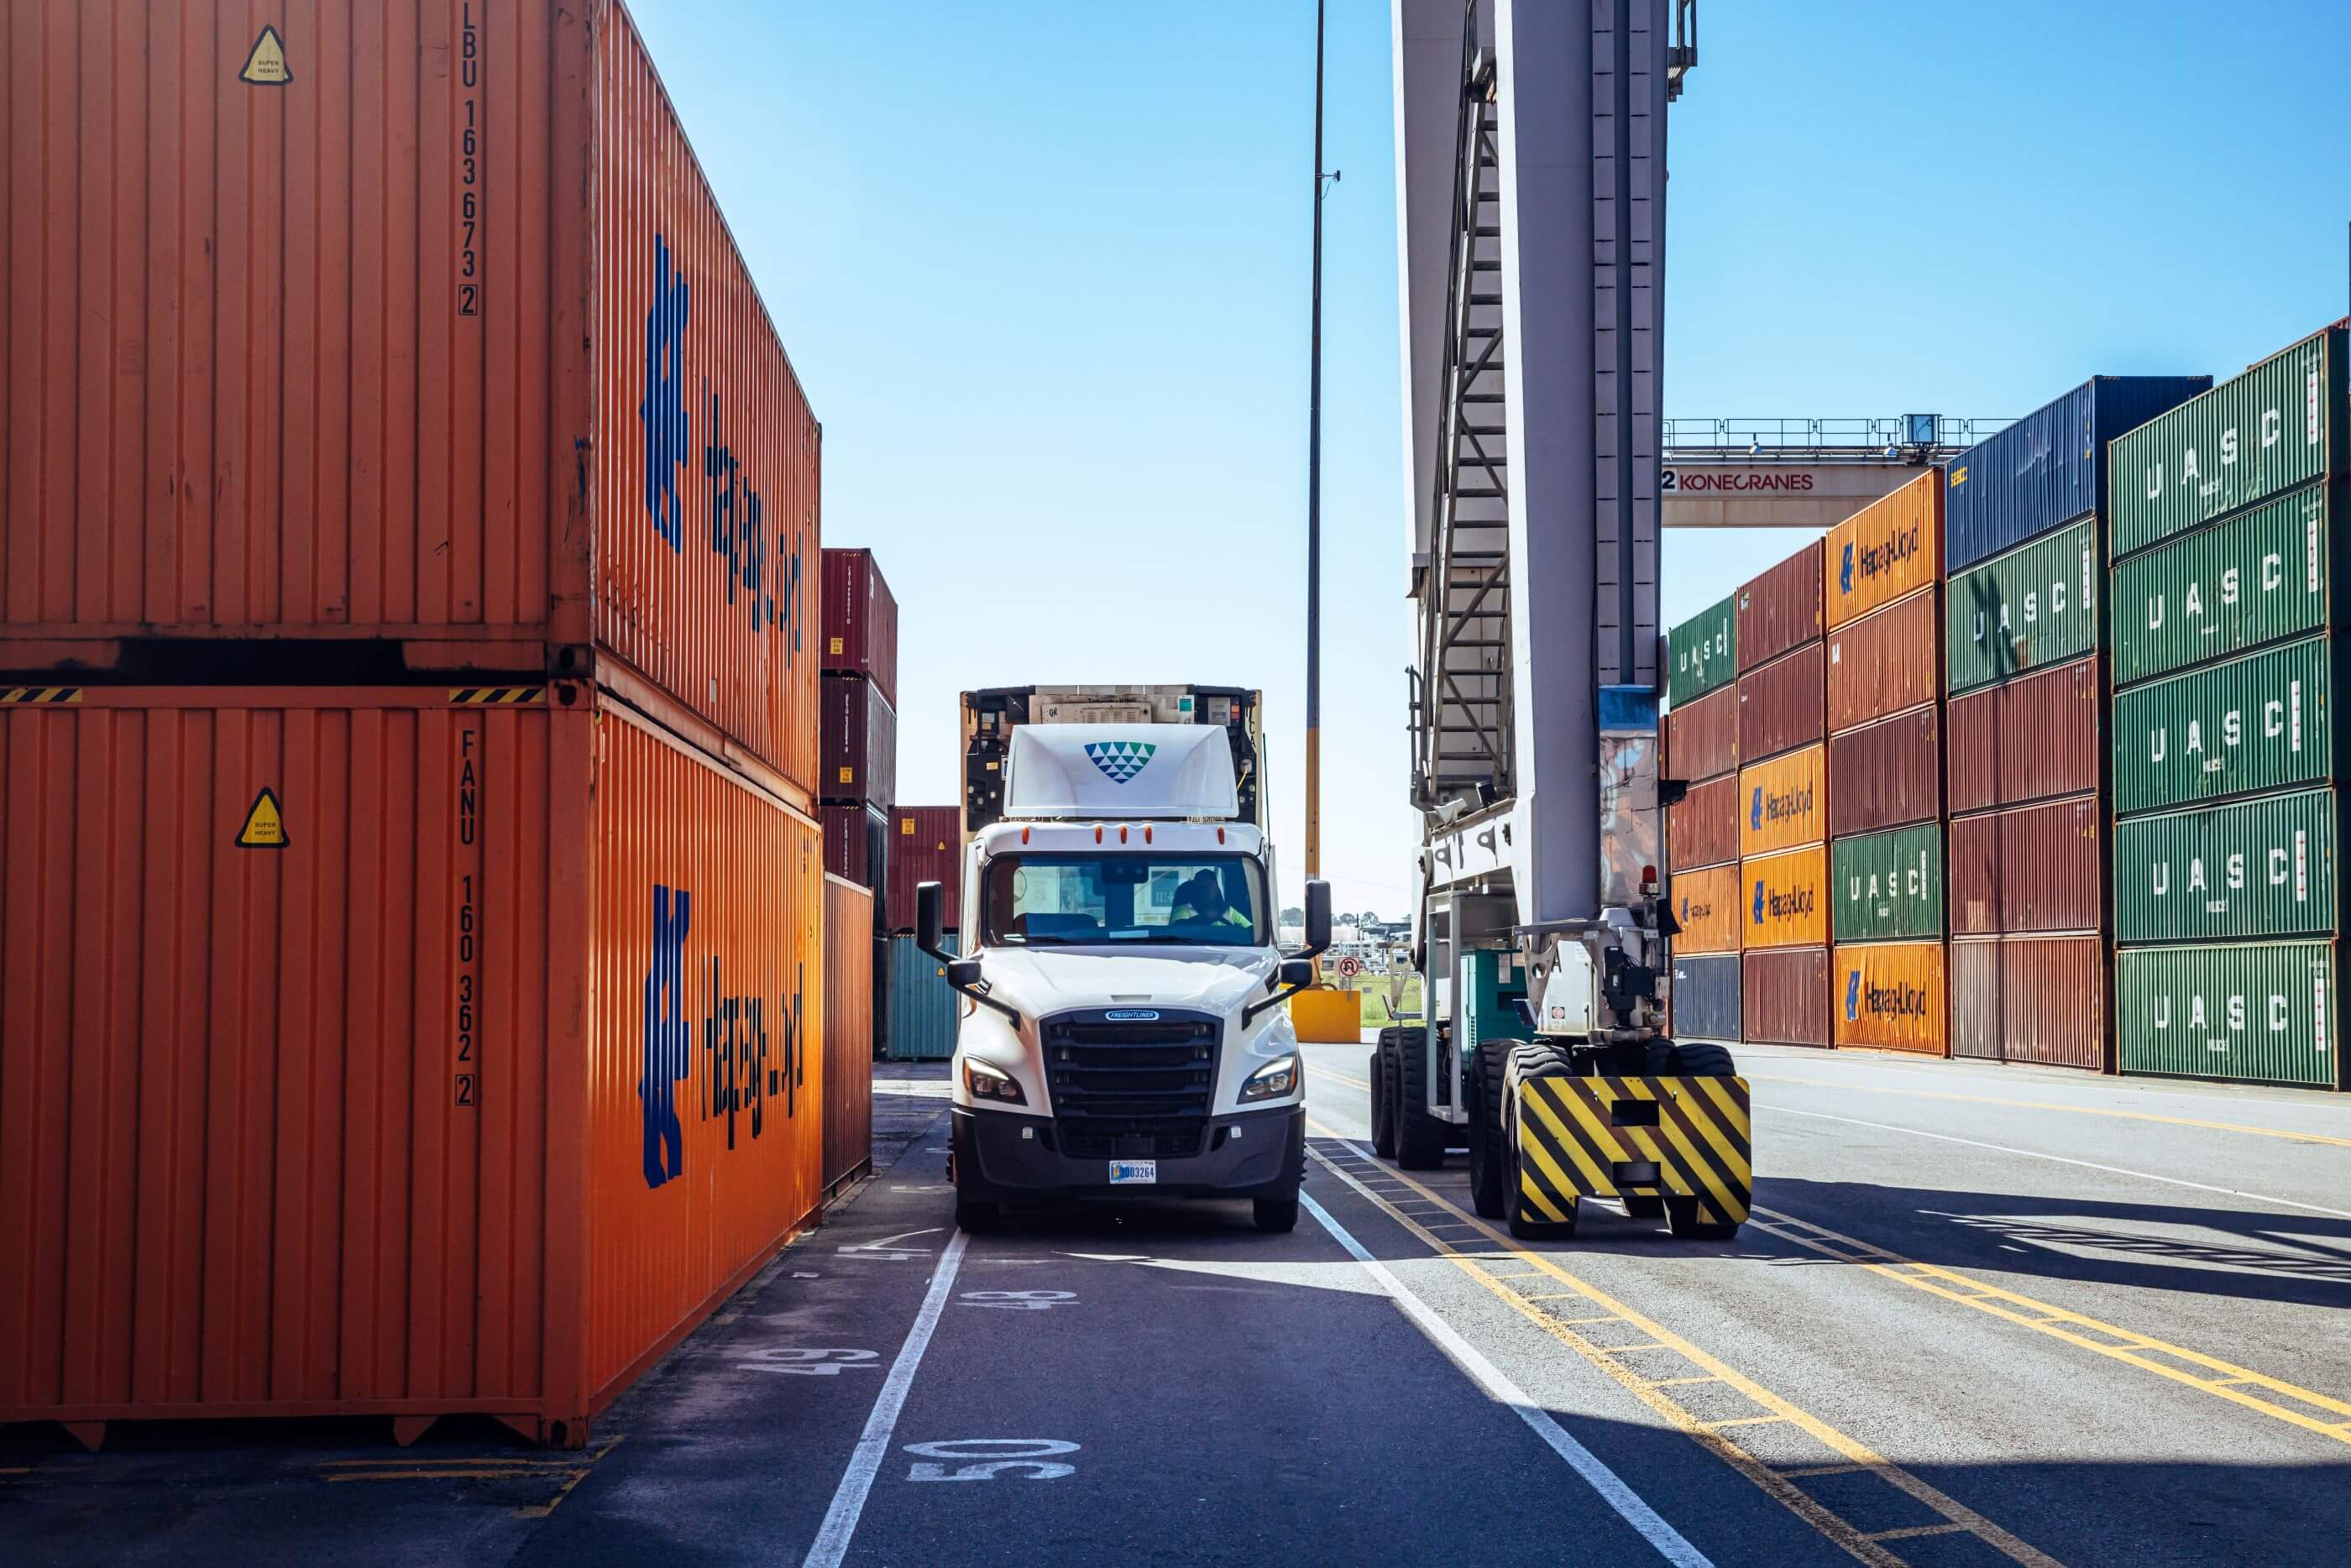 A Lineage semi-truck navigating between stacks of colorful shipping containers at a port.